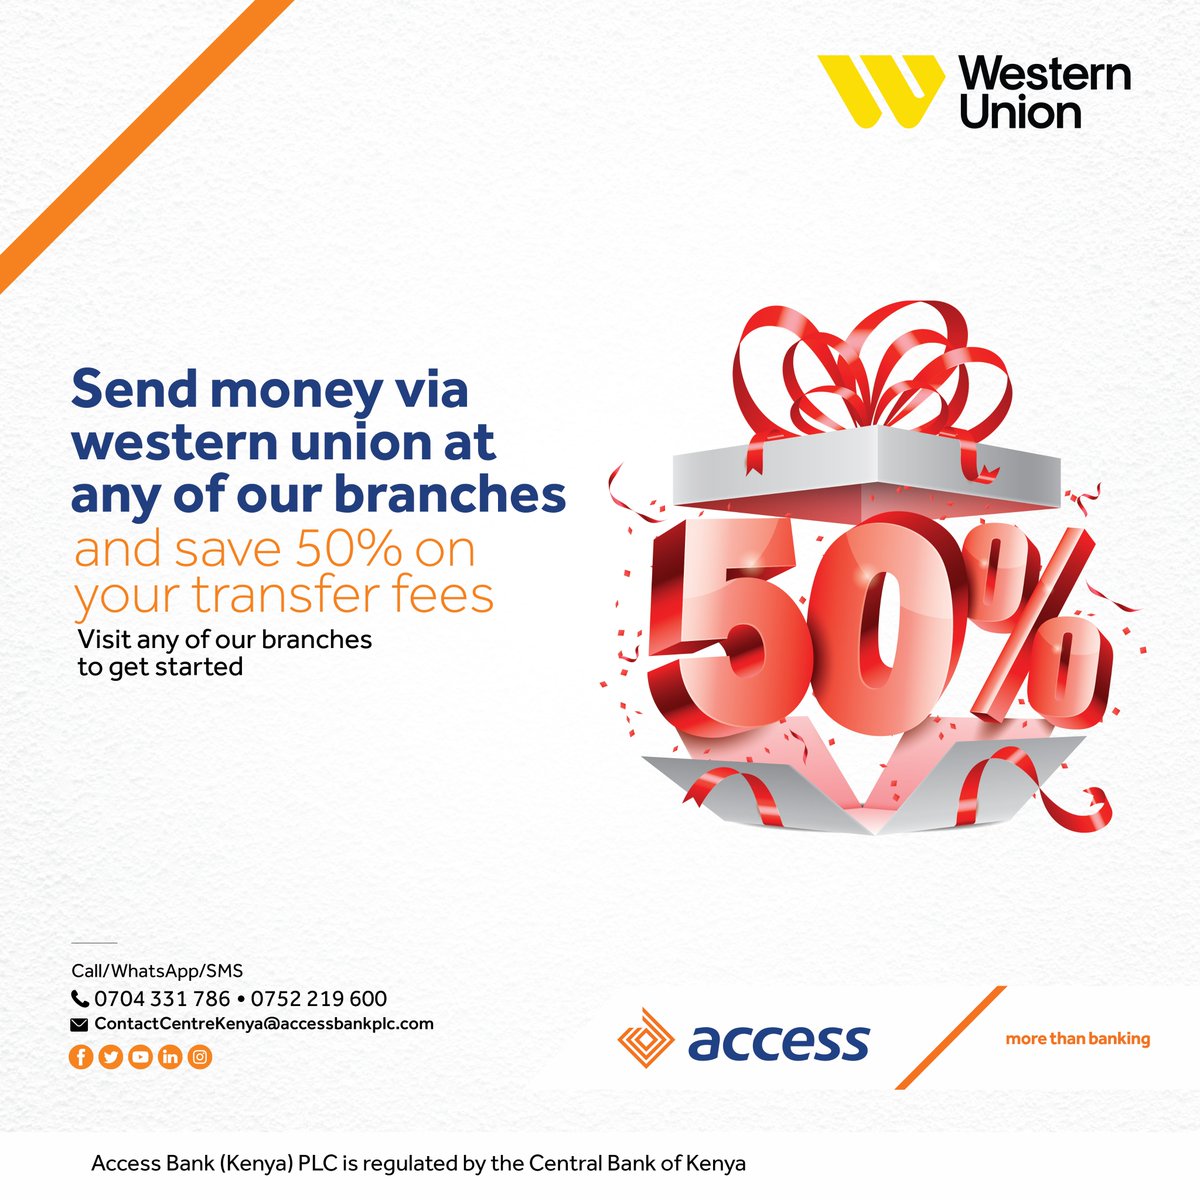 Great offer on Western Union transfers! Get 50% OFF on your transfer fees when you send money via western union to any of our branches countrywide.

Take advantage of this offer! 

Visit a branch today.

#MoreThanBanking #AccessMore